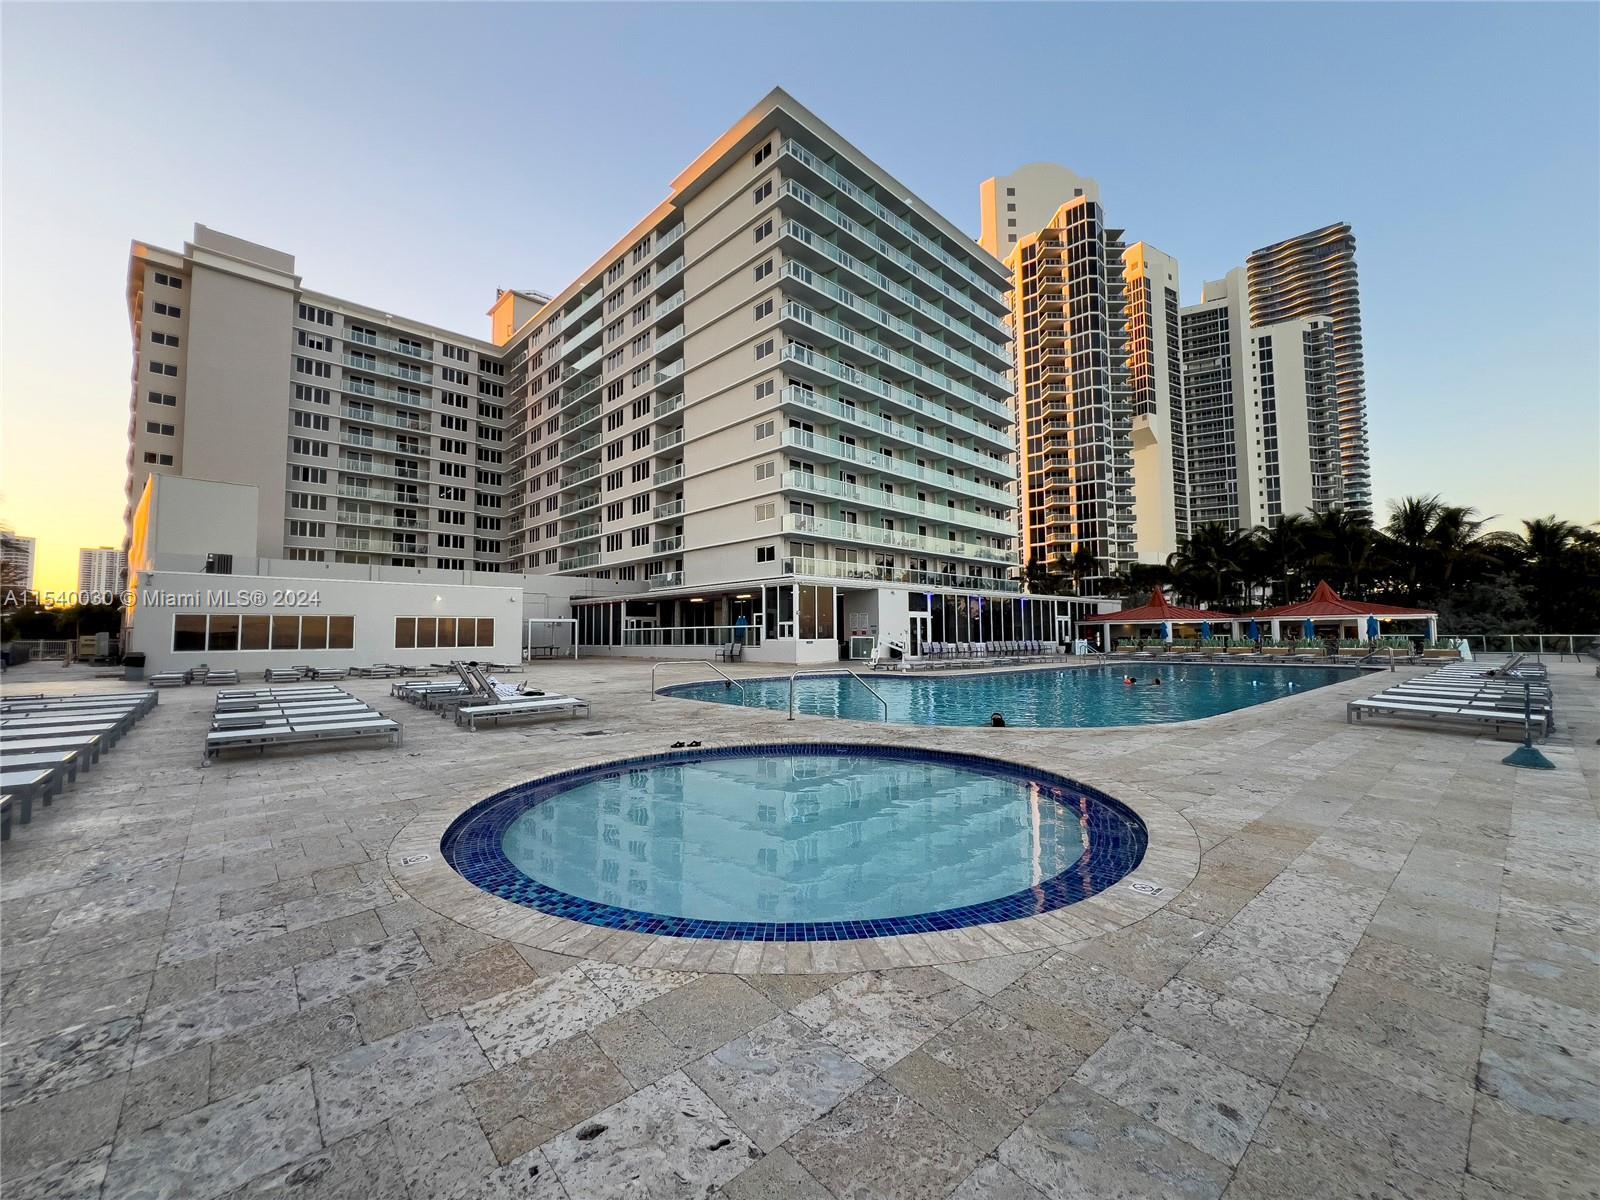 Photo of 19201 Collins Ave #321 in Sunny Isles Beach, FL